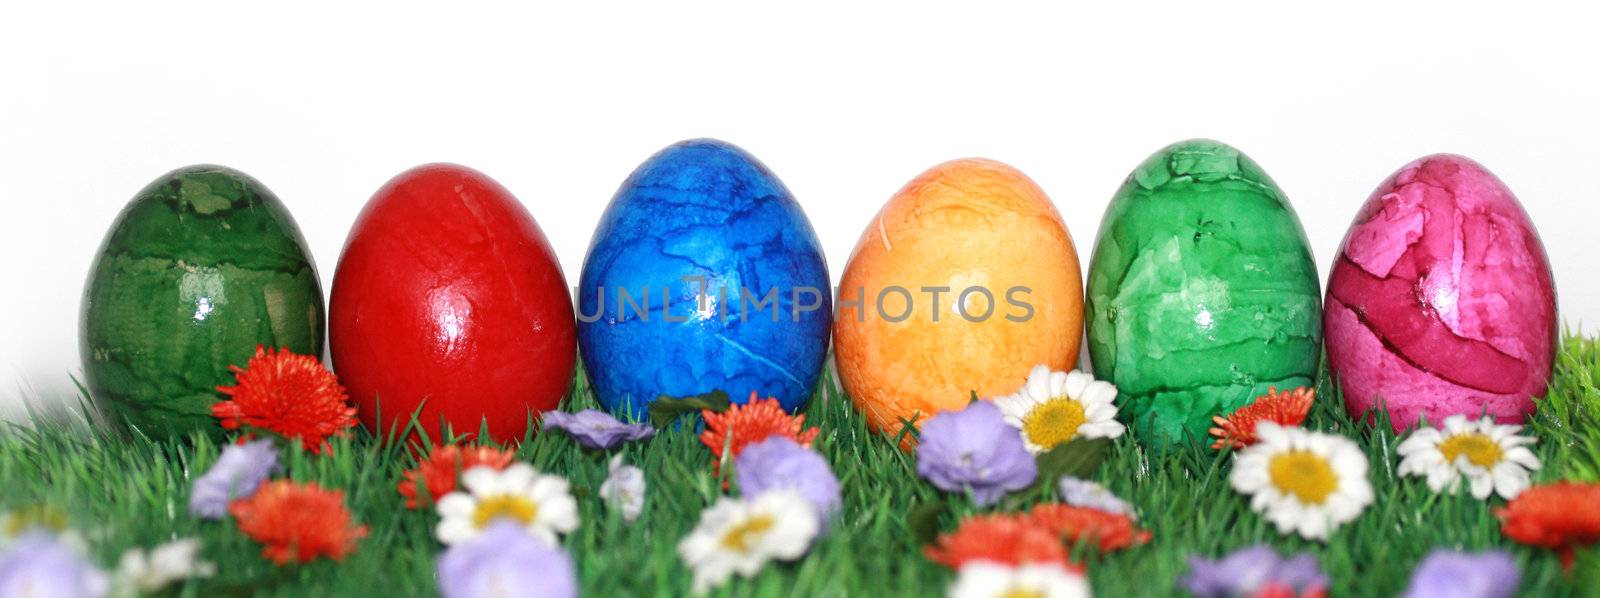 Easter banner with colorful eggs by photochecker